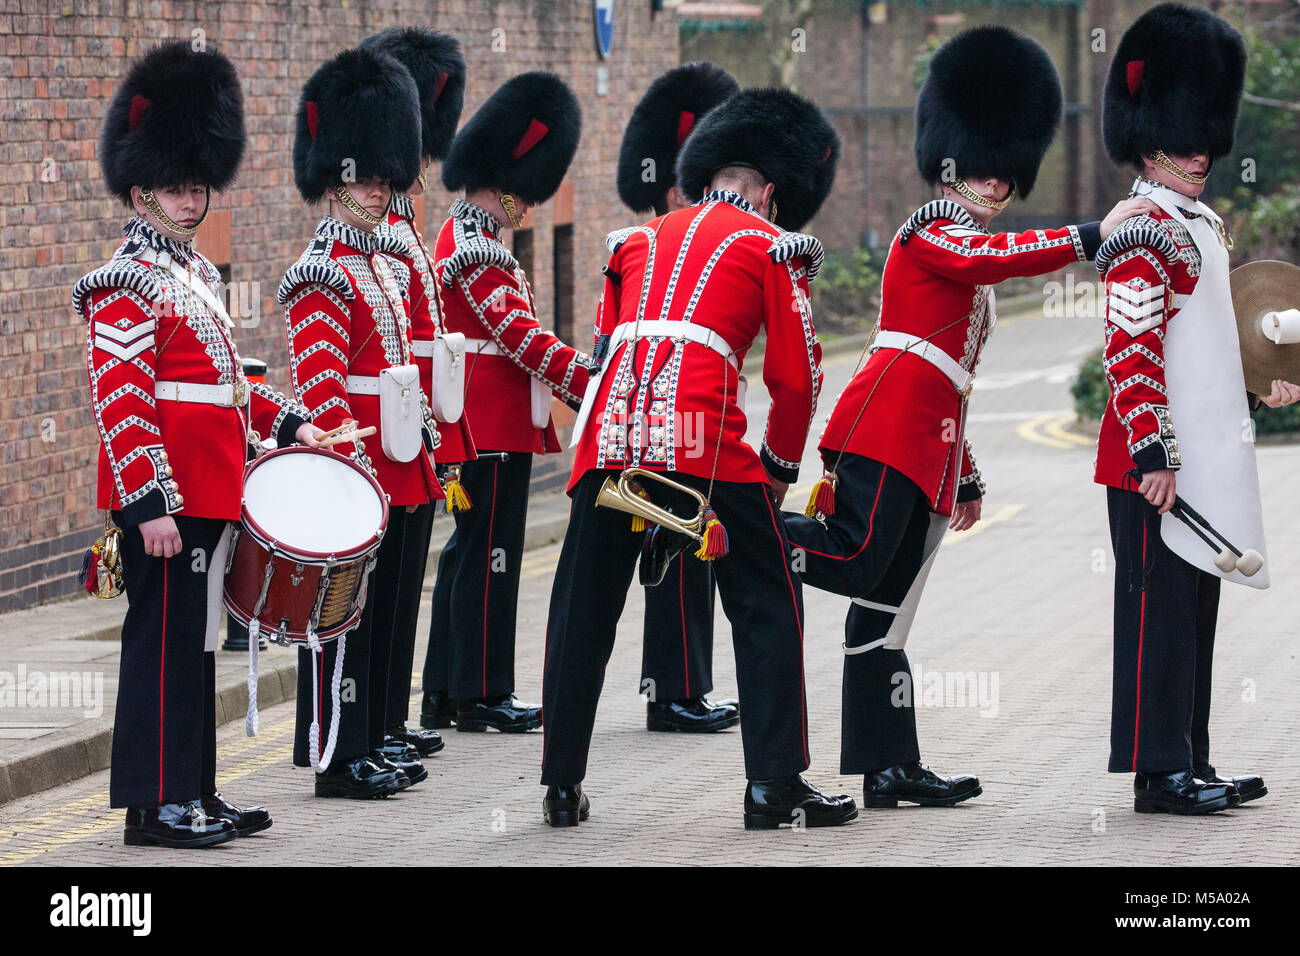 Windsor, UK. 21st February, 2018. Members of the Drum Corps Coldstream Guards prepare to attend the Major General's Inspection of the 1st Battalion Coldstream Guards, chosen to Troop its Colour for the Queen’s Birthday Parade on 9th June. Soldiers are tested on military knowledge, history, values and standards and their uniforms, presentation and drill are minutely examined. Credit: Mark Kerrison/Alamy Live News Stock Photo